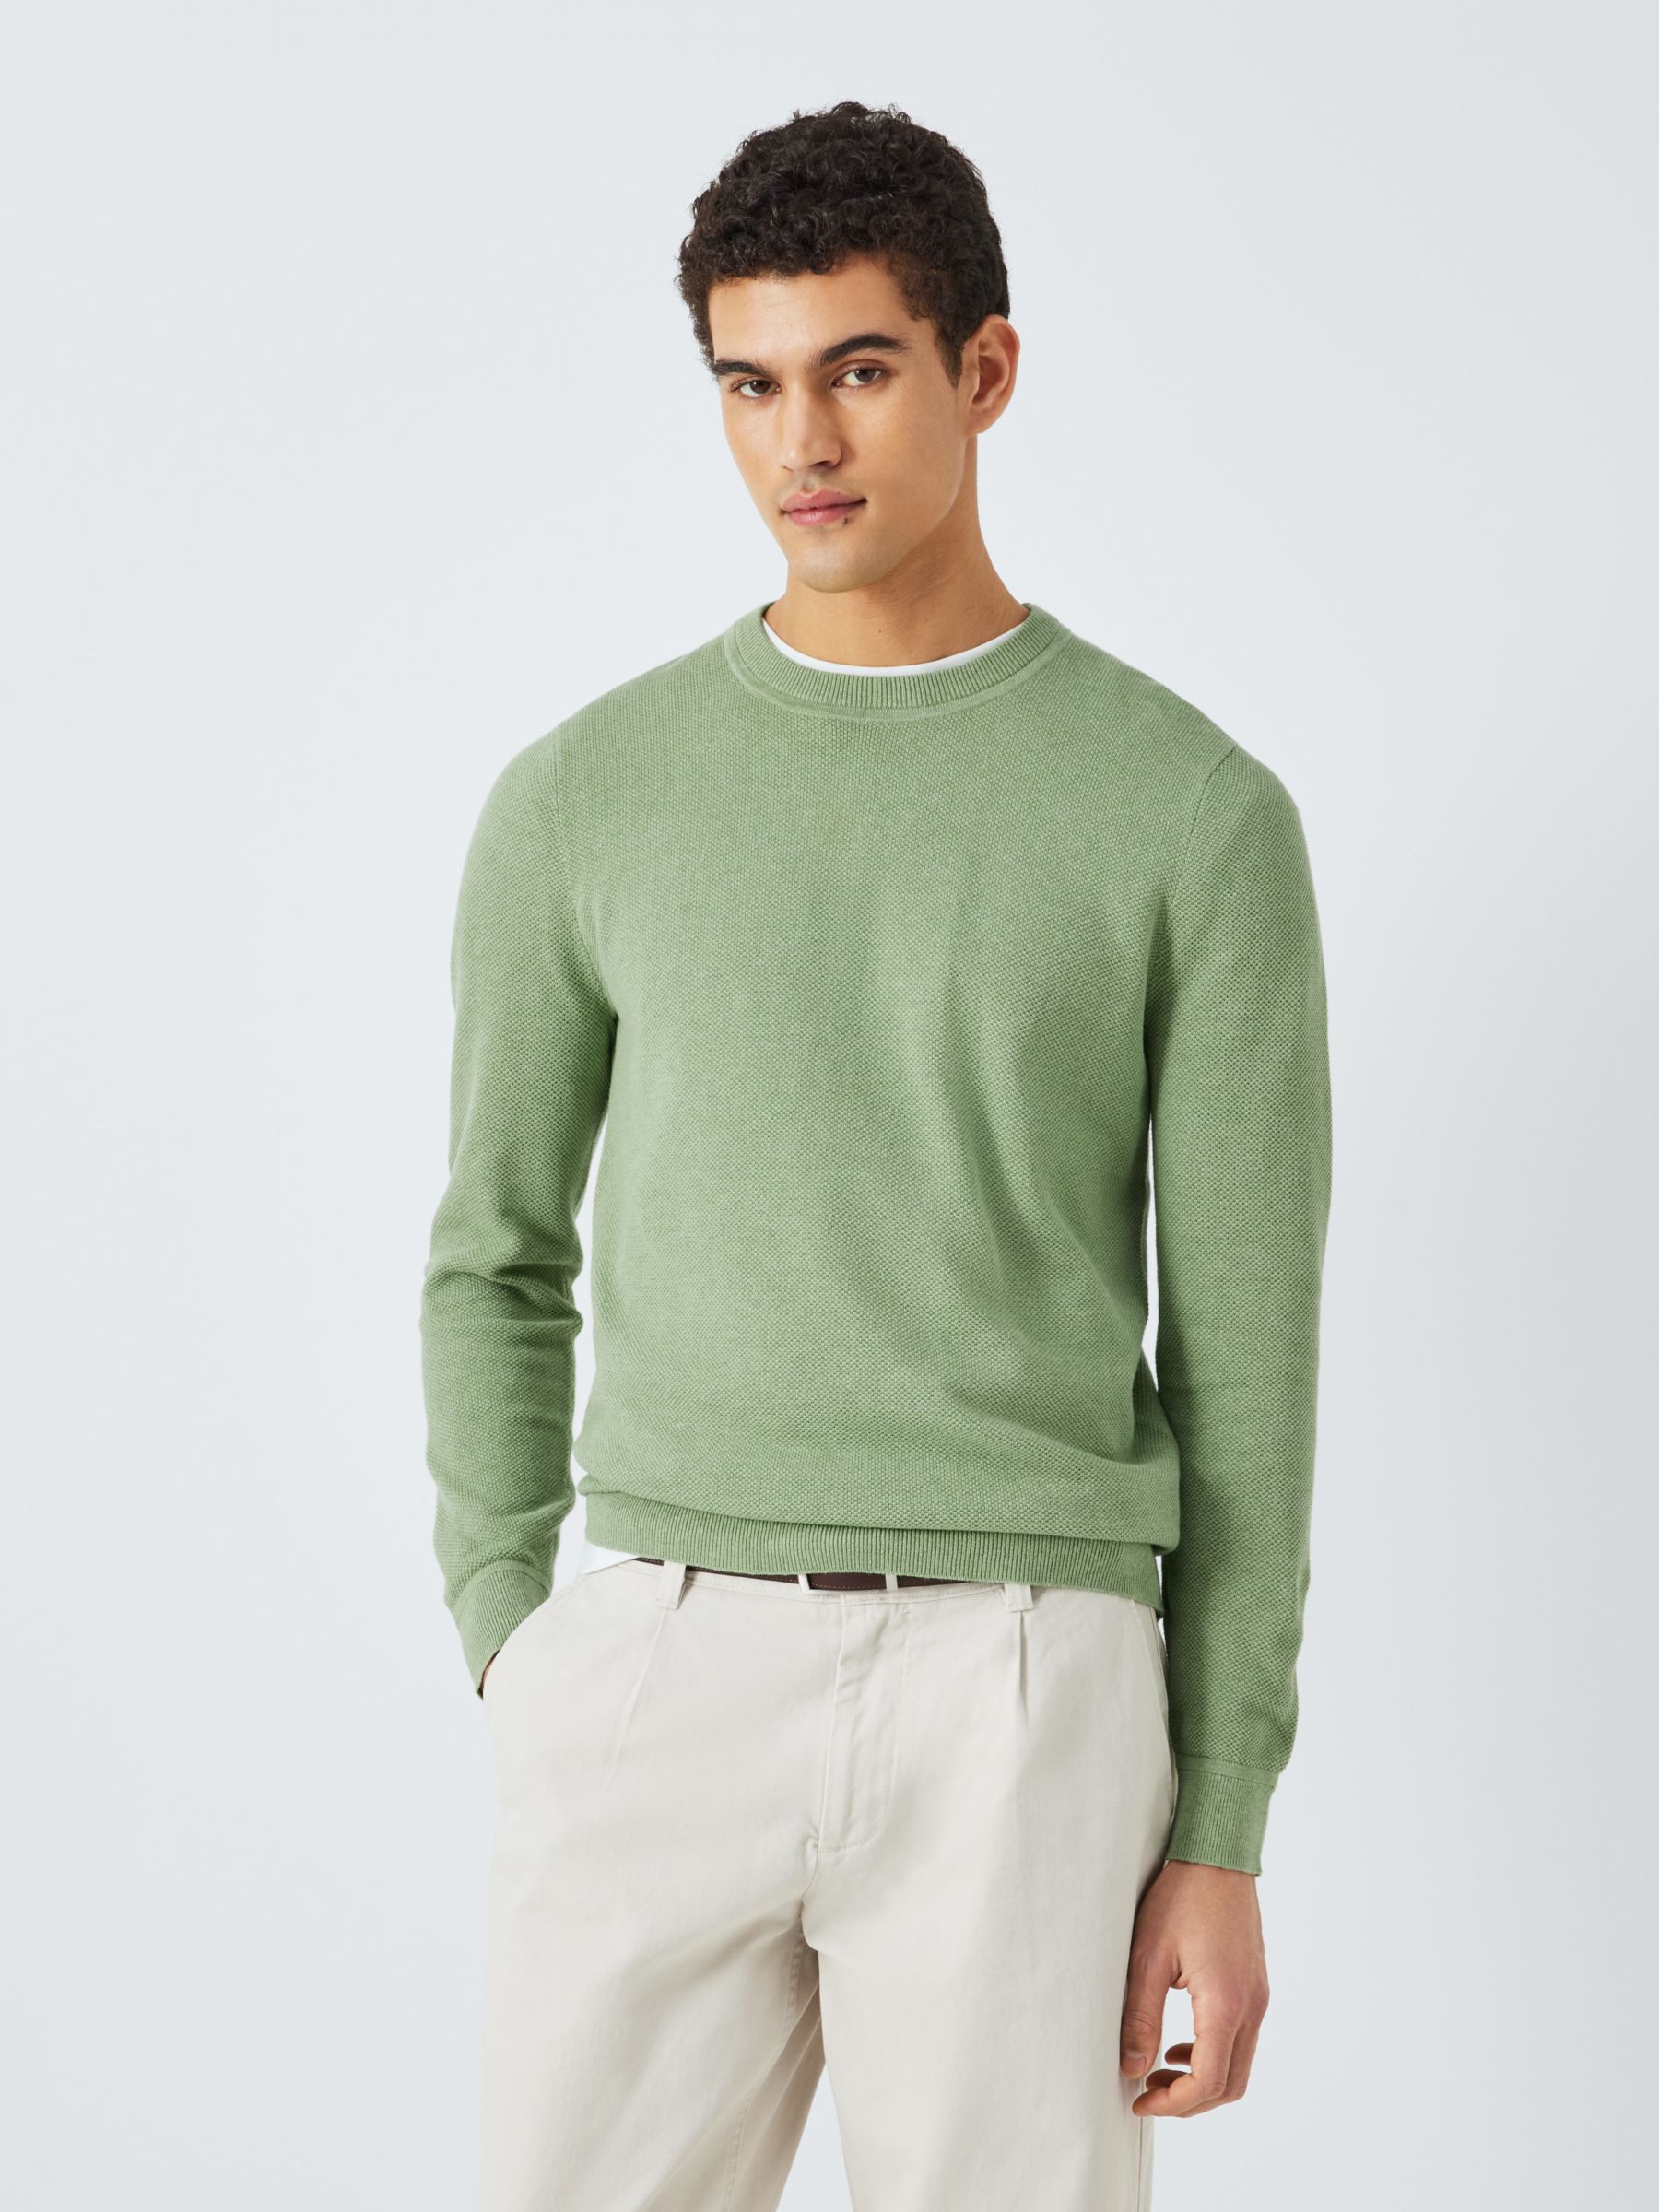 Men's Next Level Layering - Jumpers